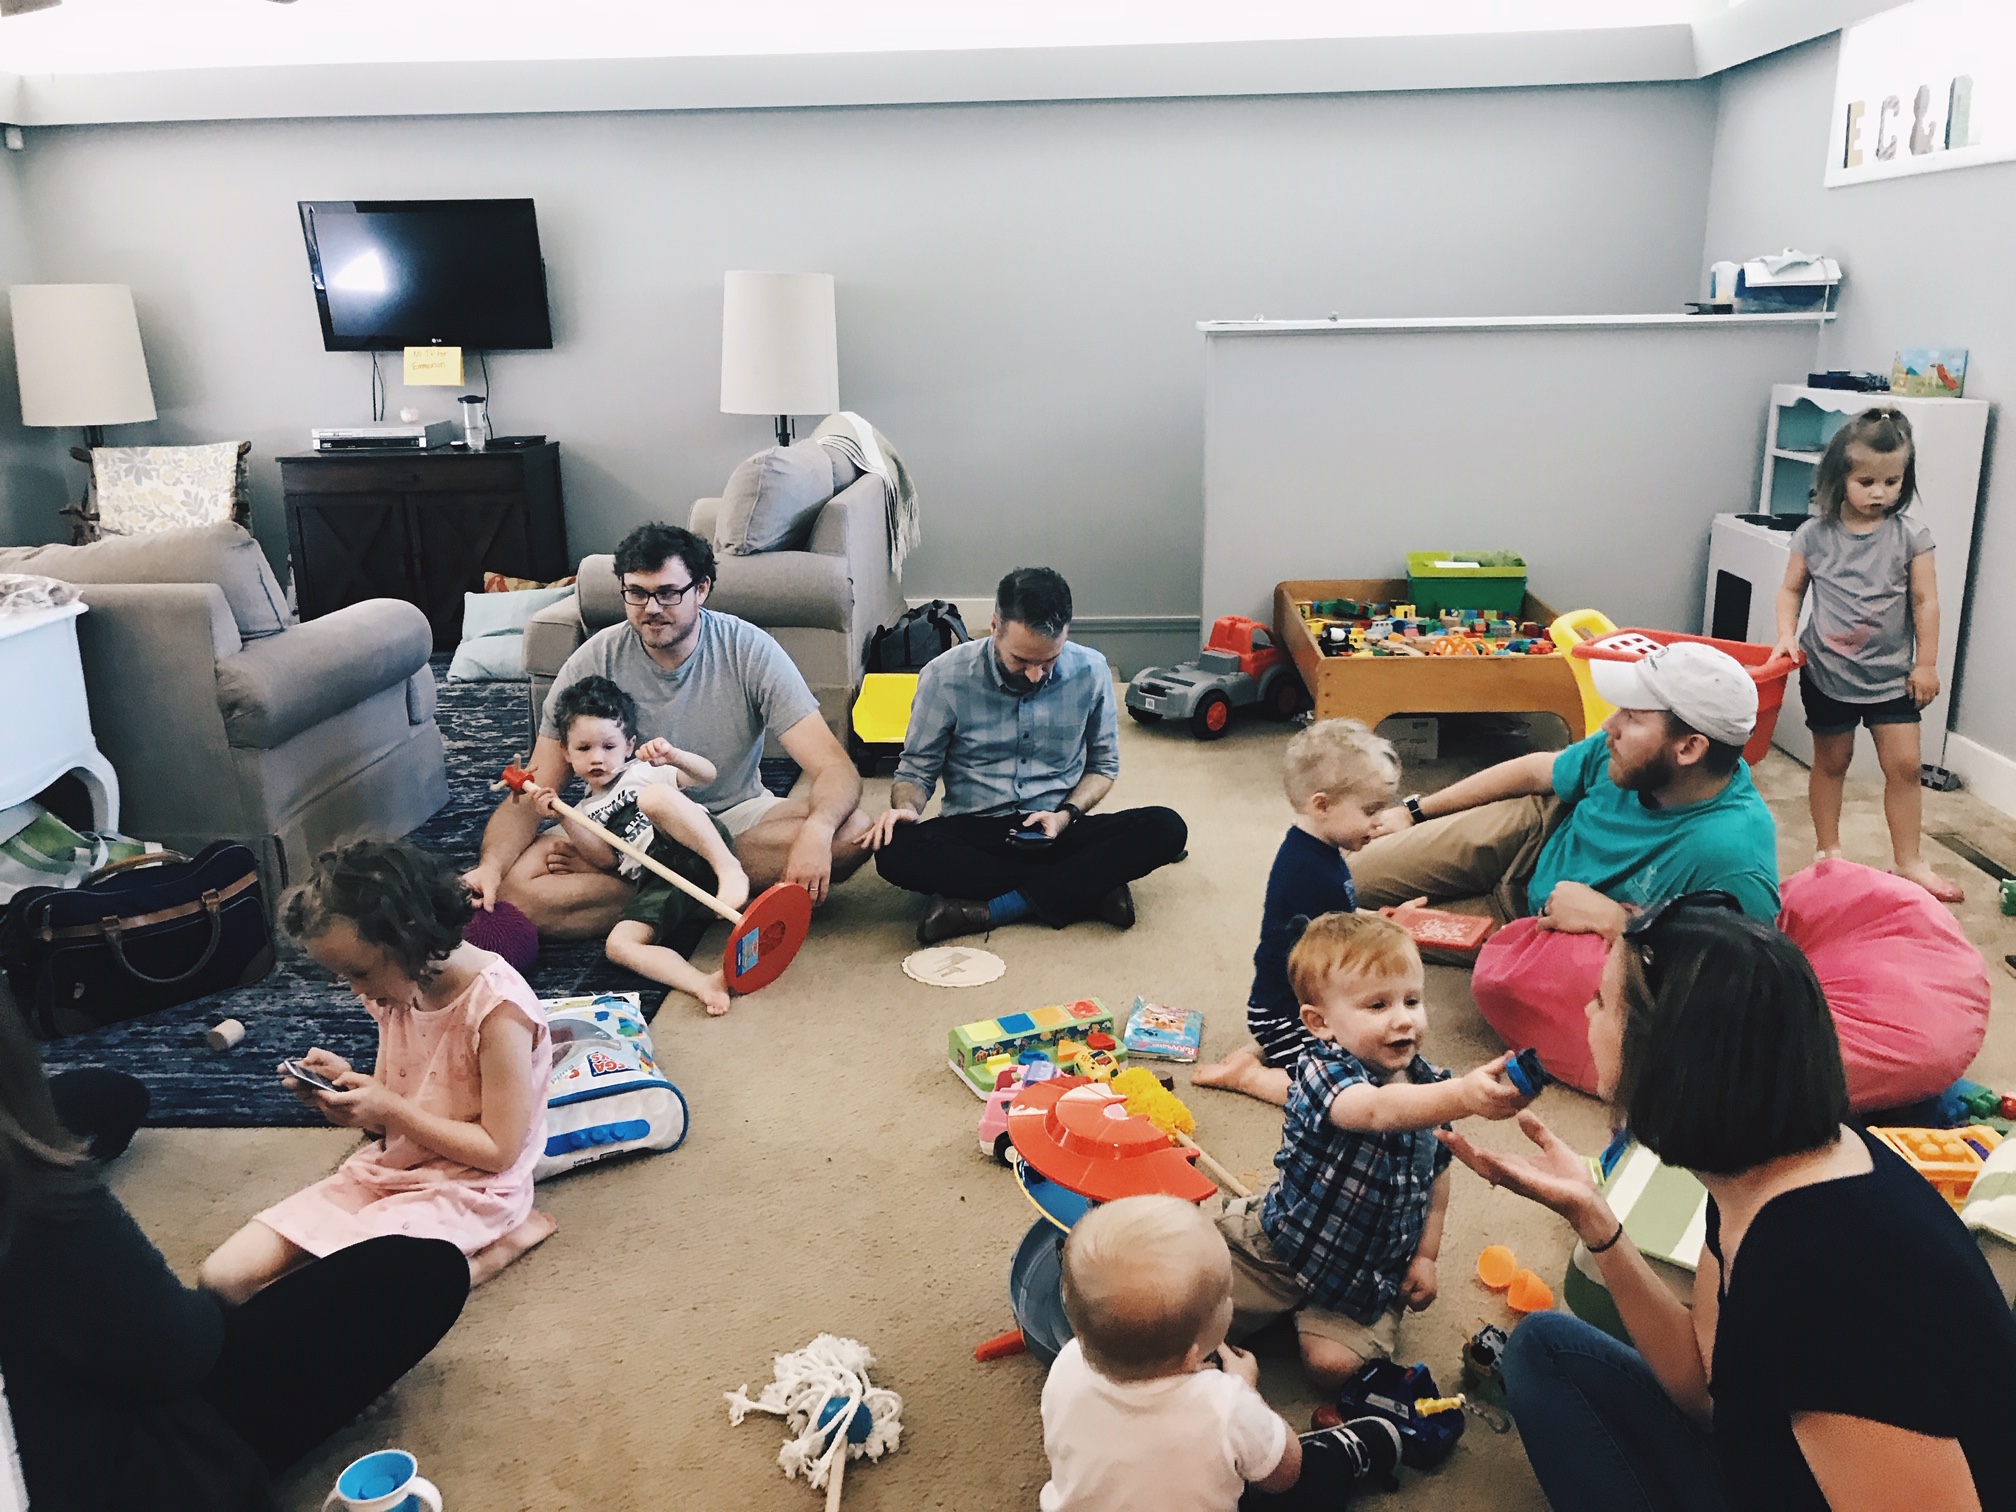 Adults and kids in a messy room.